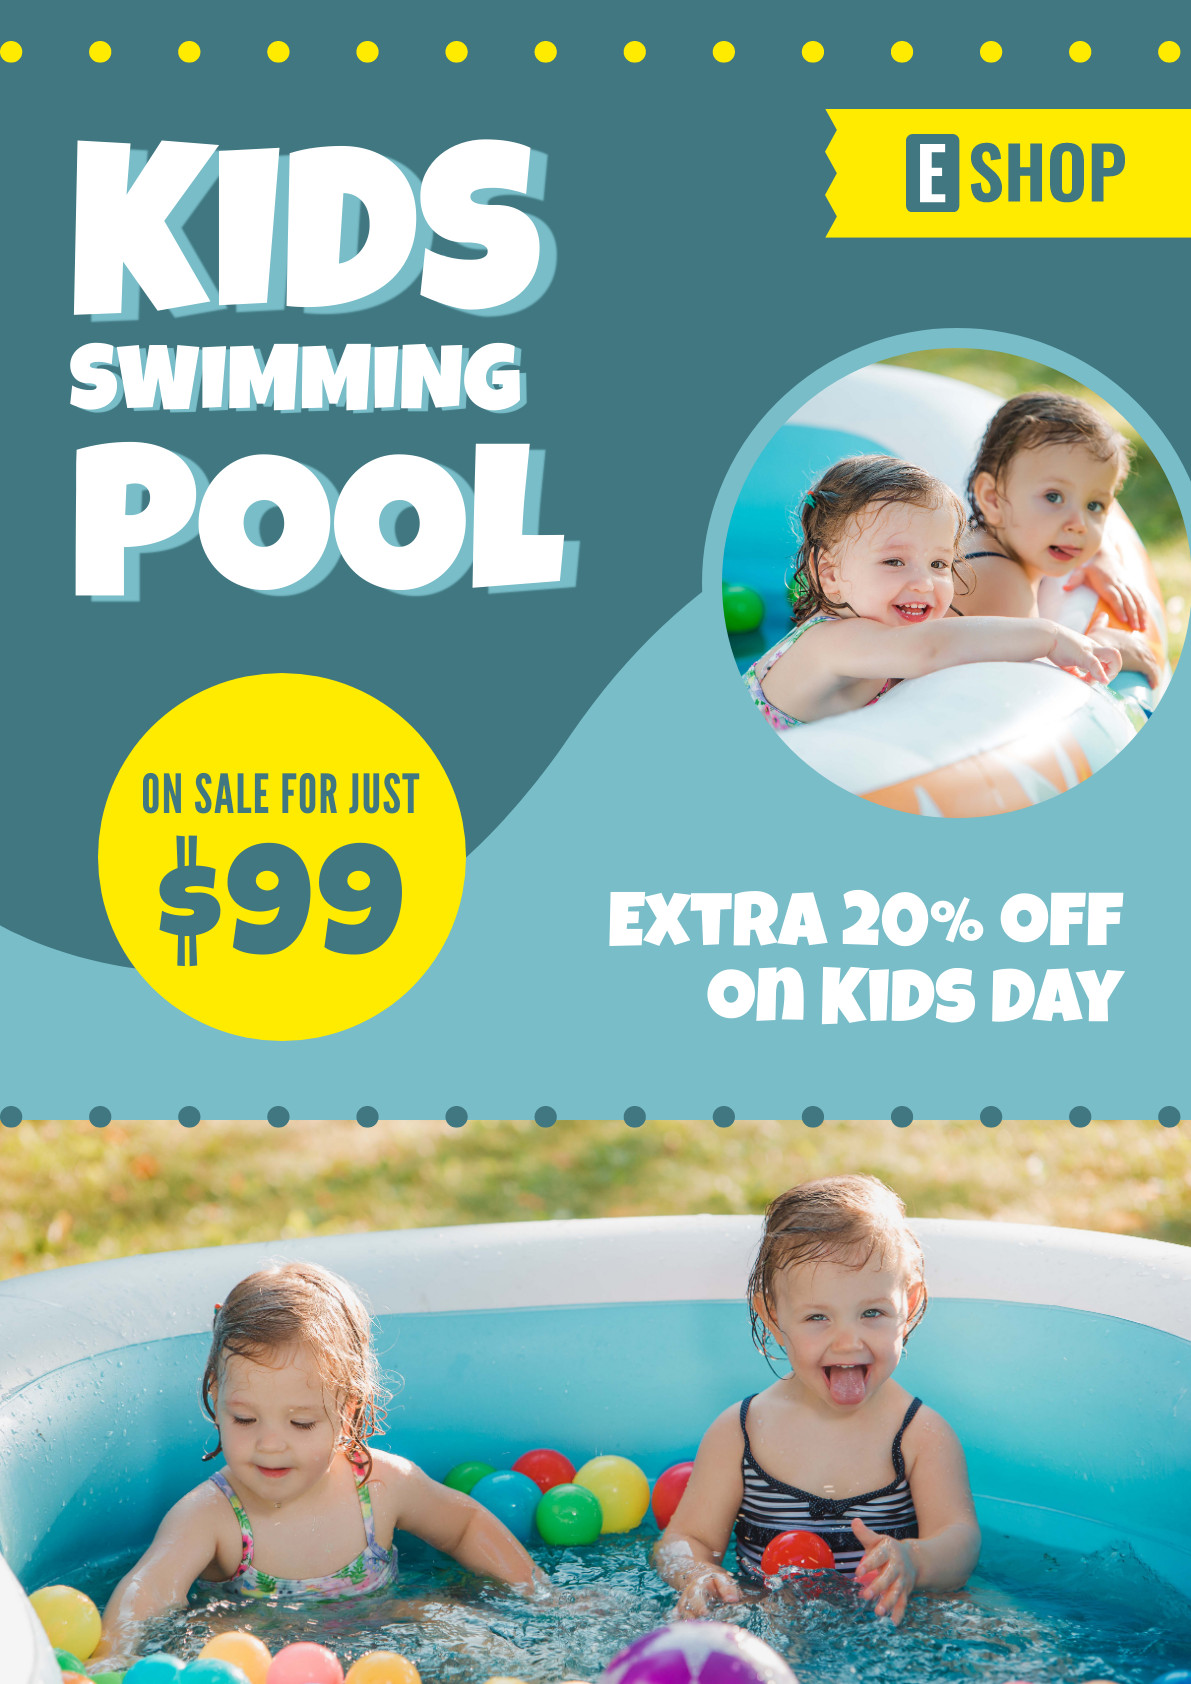 Kids Swimming Pool On Sale – Poster Template 1191x1684